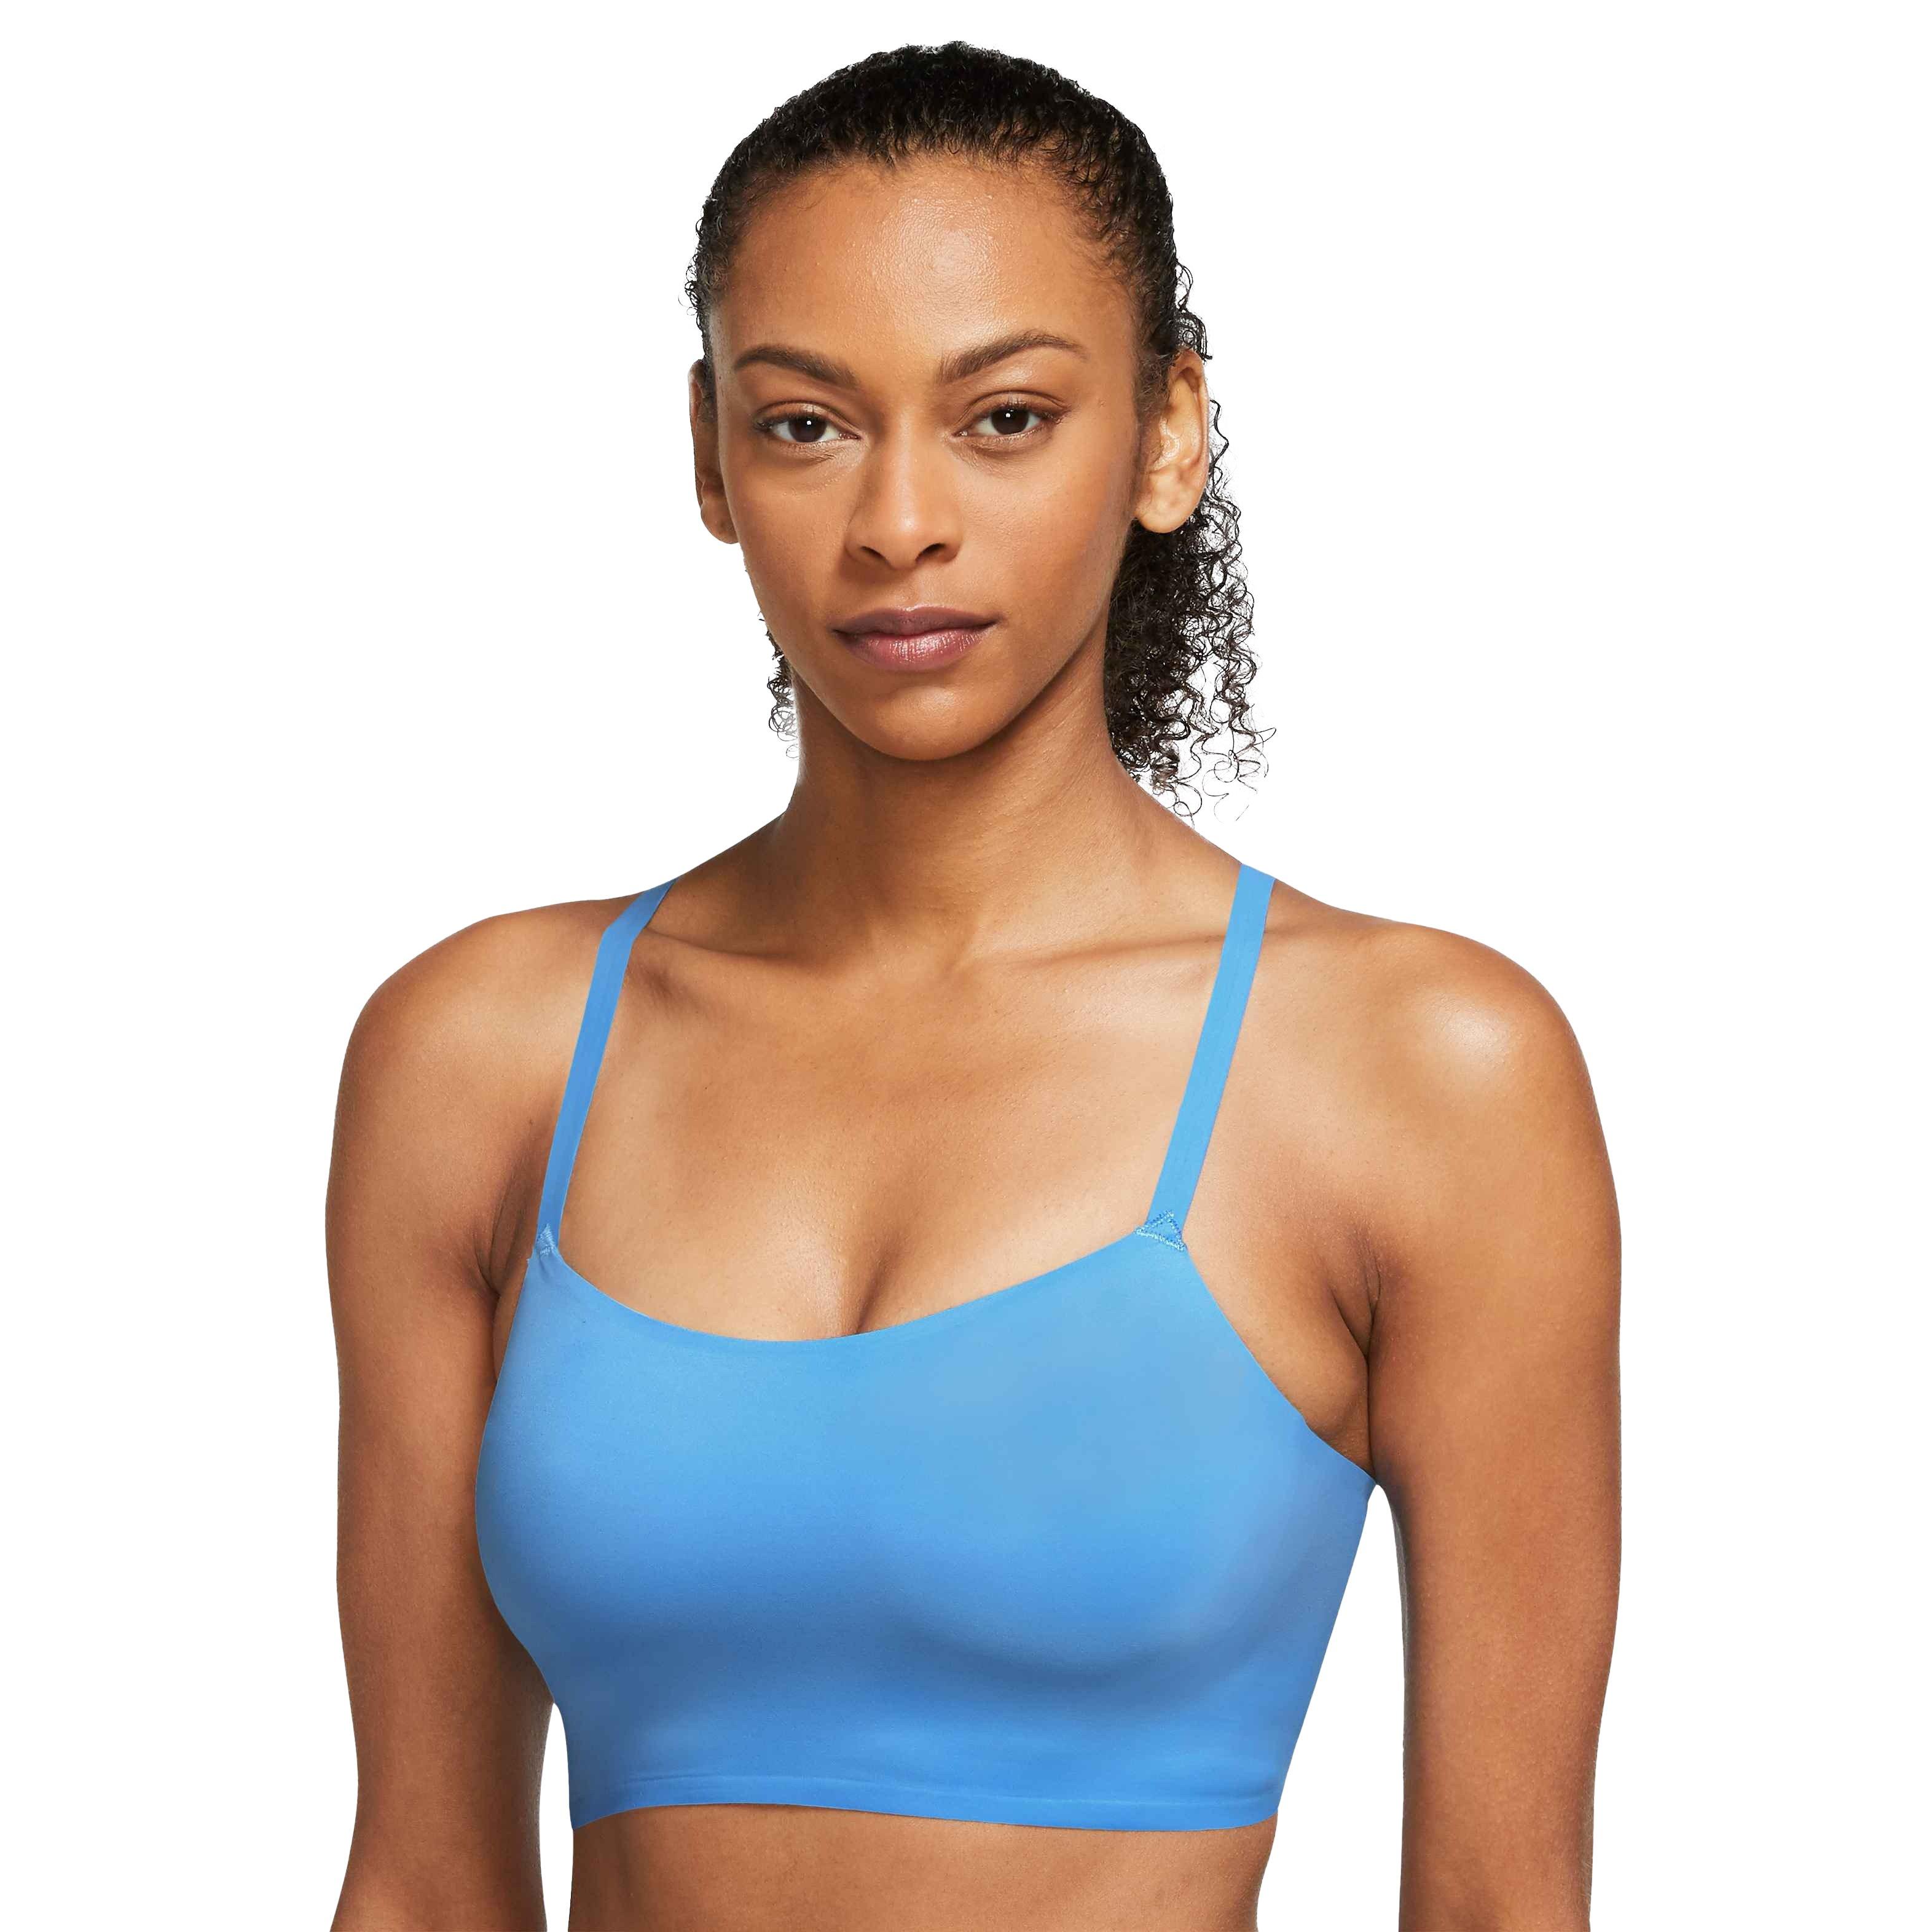 Nike Indy Luxe Bra - Women's - Clothing